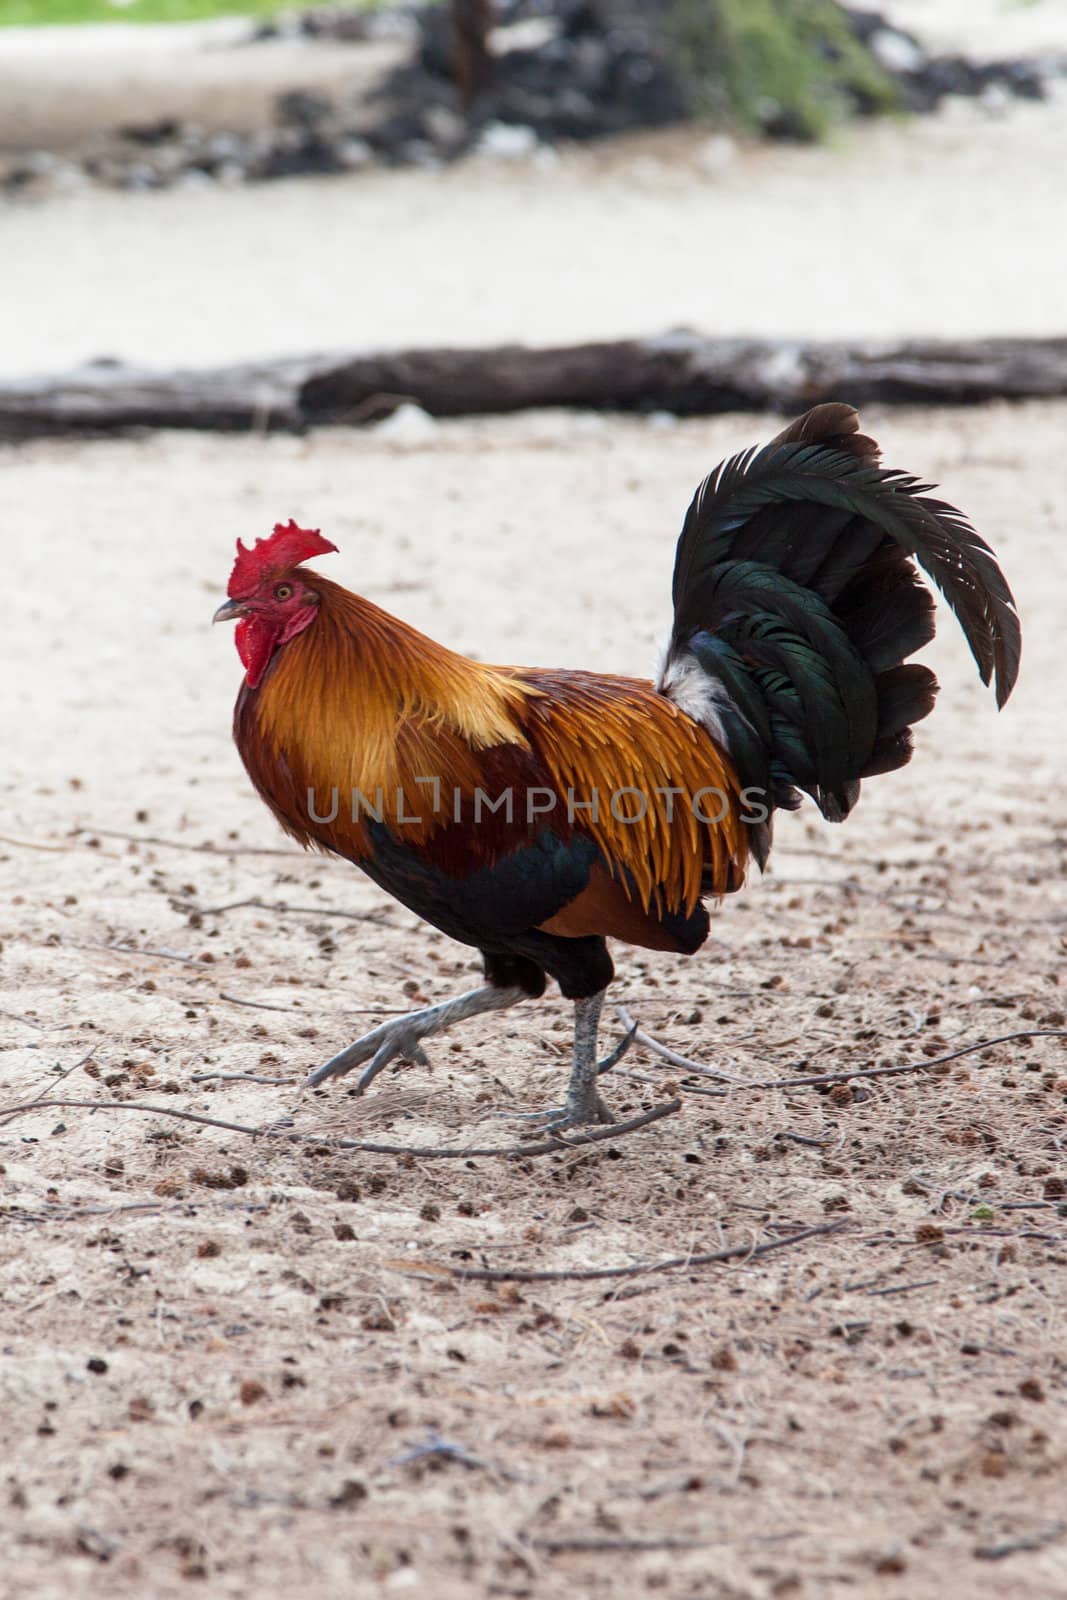 Wild Rooster by studio49